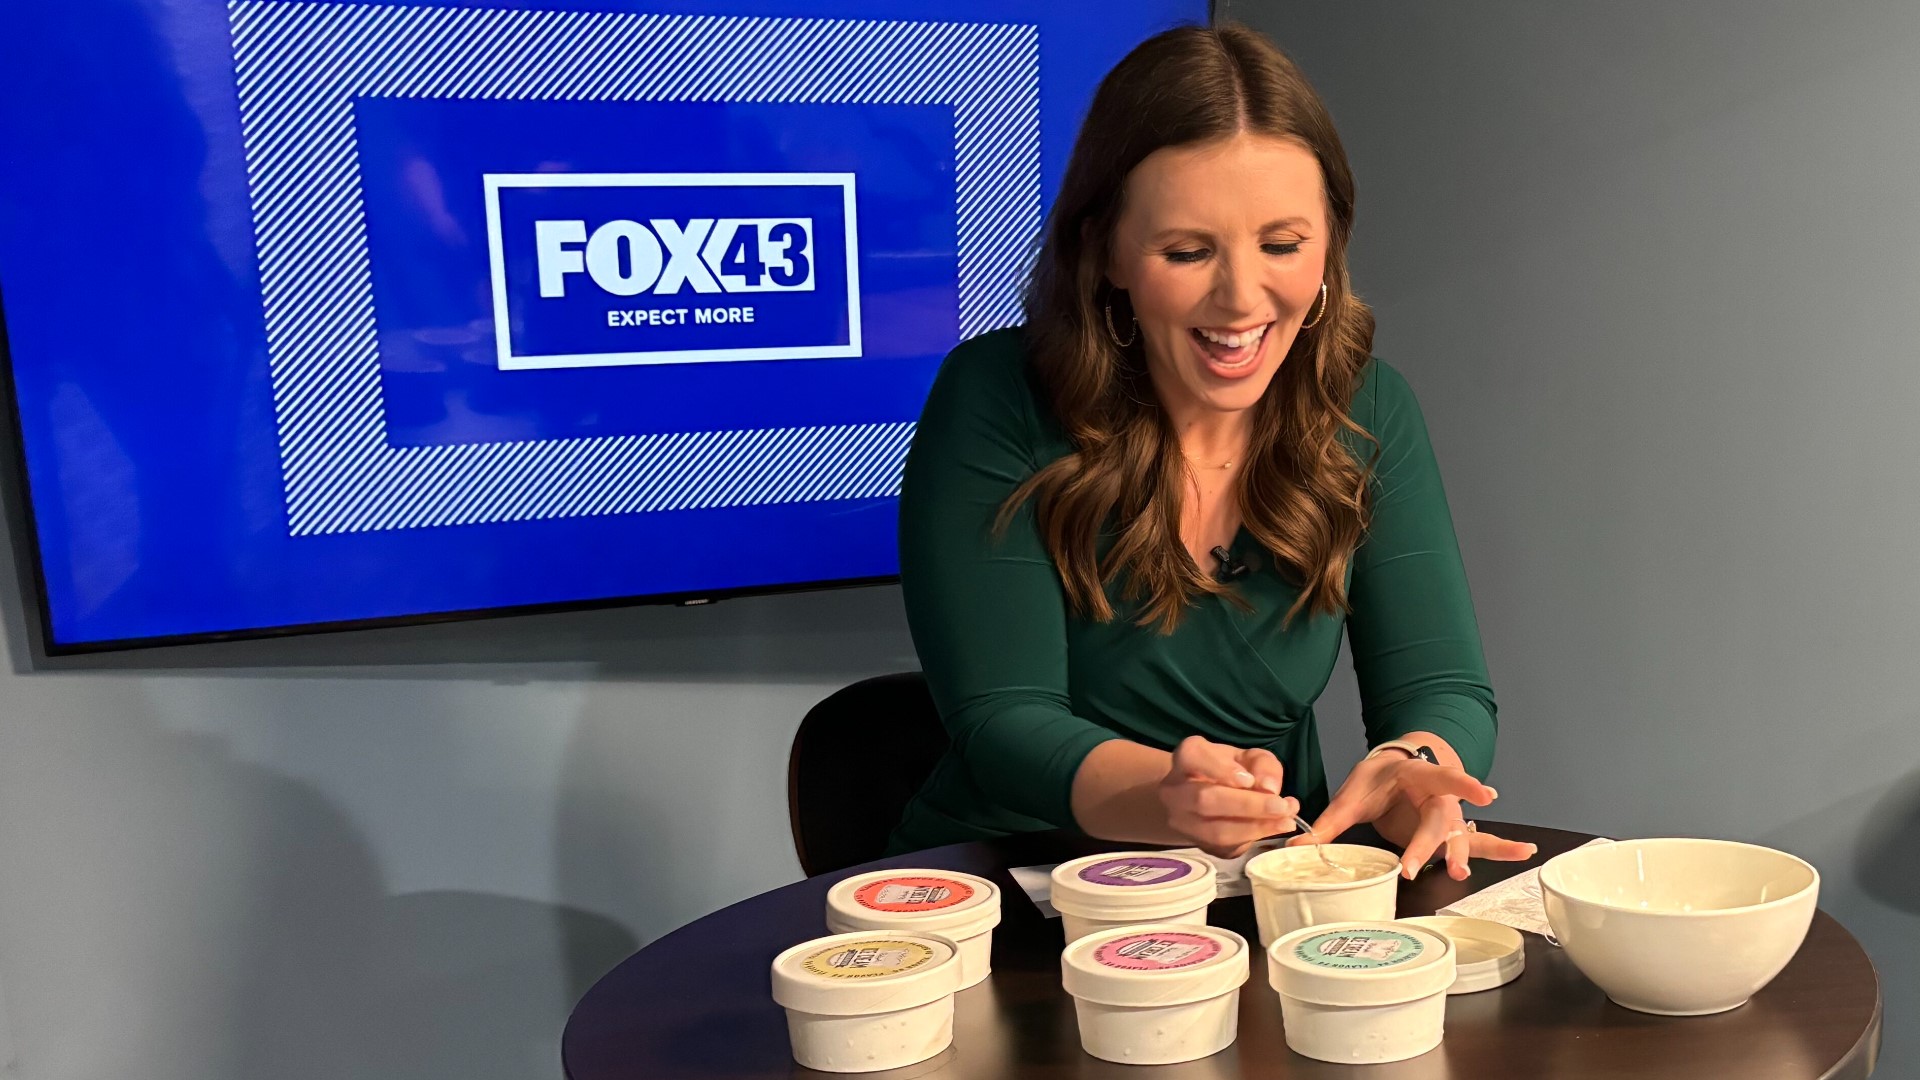 The Conundrum kit includes six cups of mystery ice cream and a clue sheet with flavors such as "shrimp," "crickets" and "cheesecake."